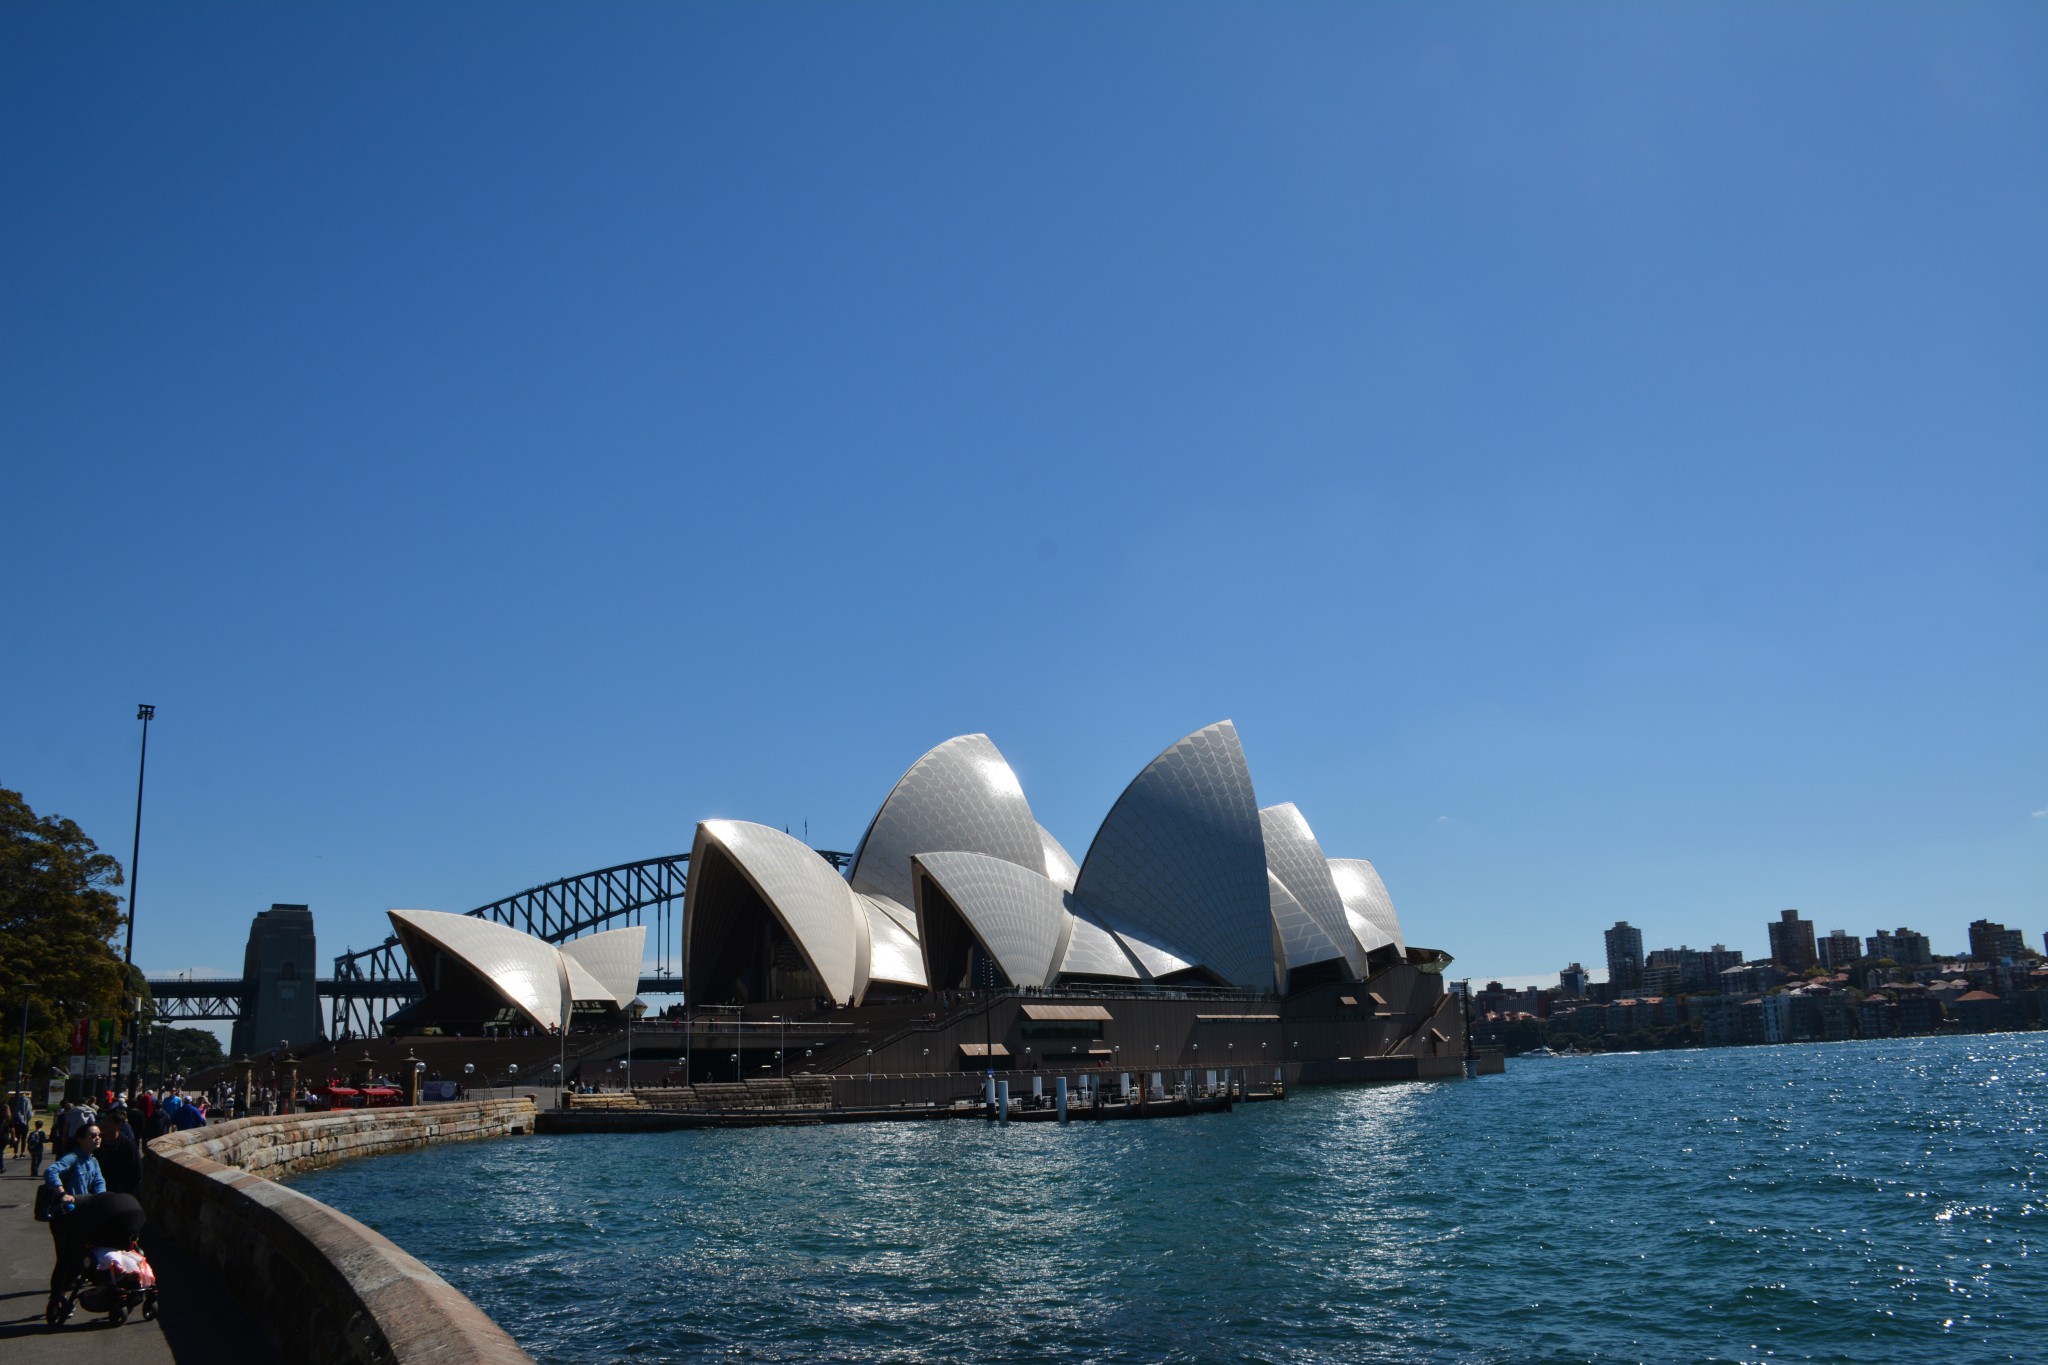 Day 8 – 9/10/17 – A Self-Paced Tour of Sydney